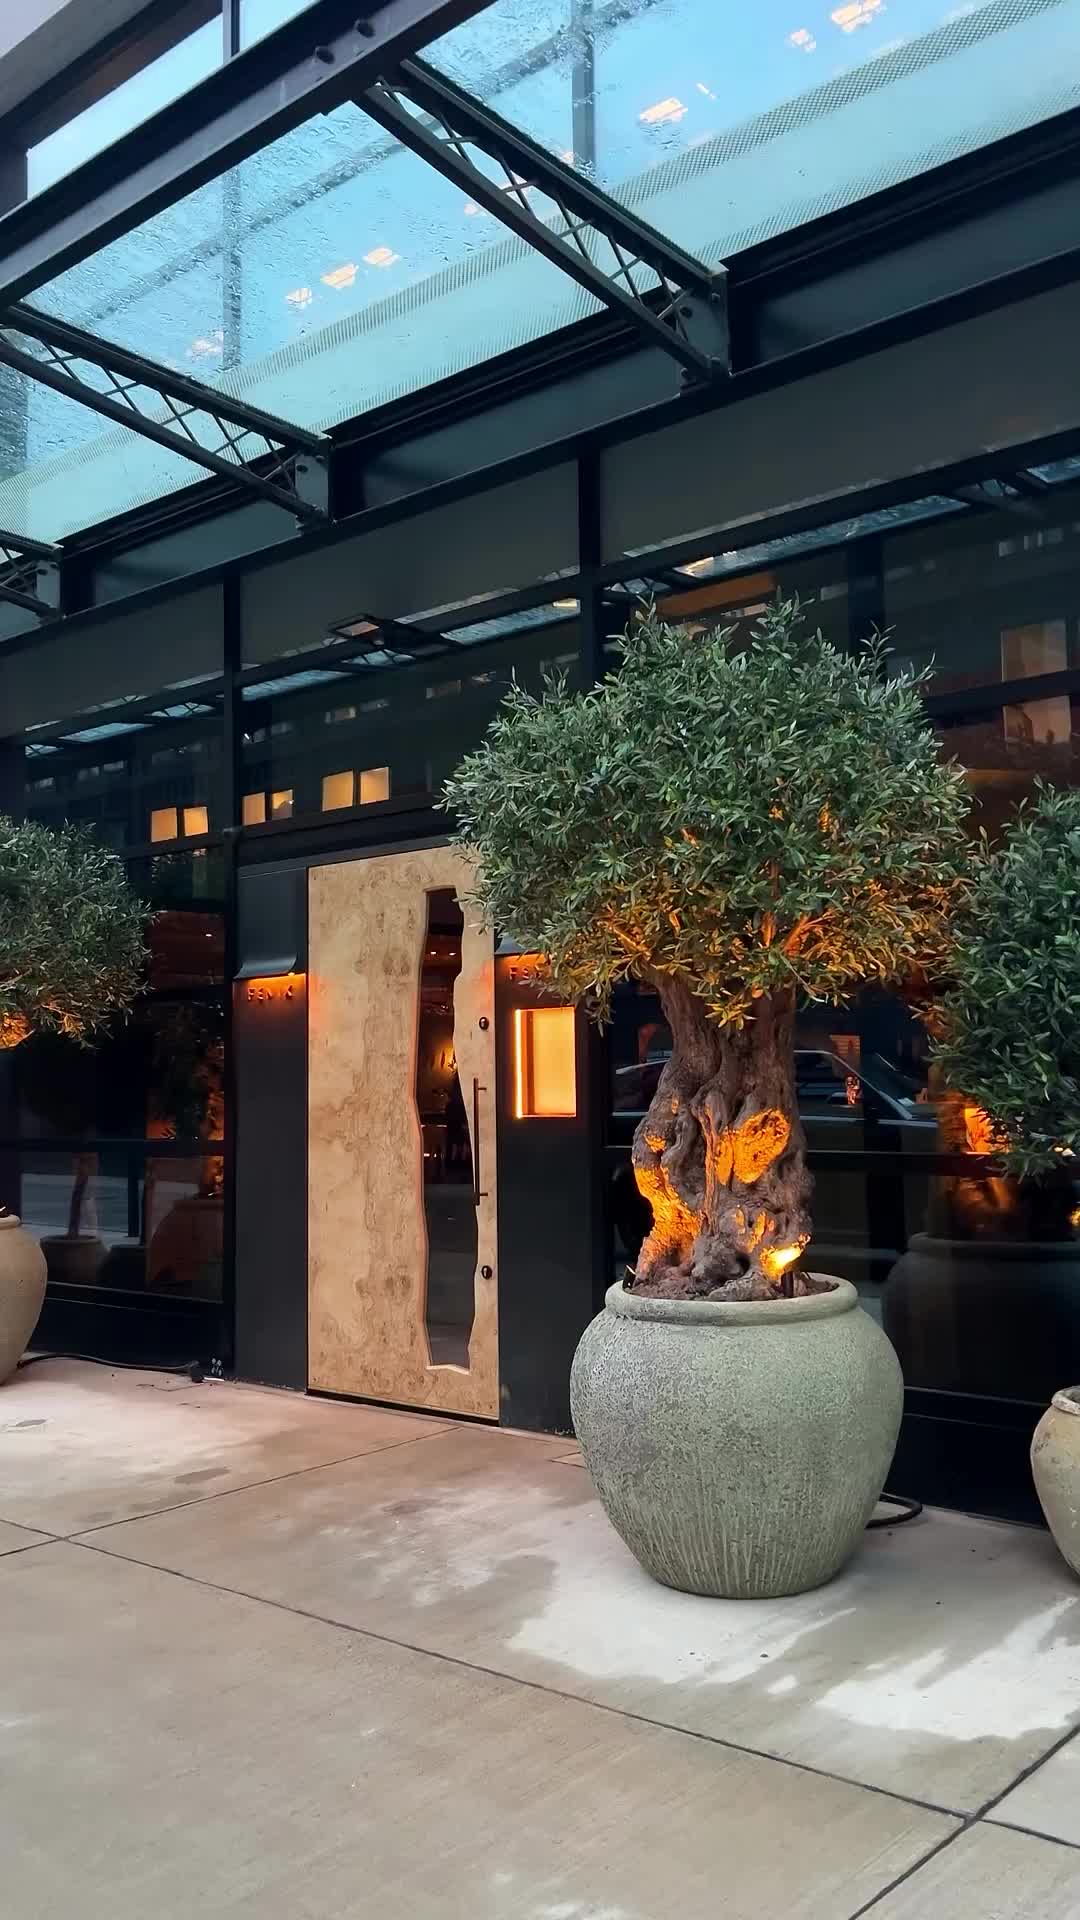 Escape to Greece at Manchester's New Fenix Restaurant